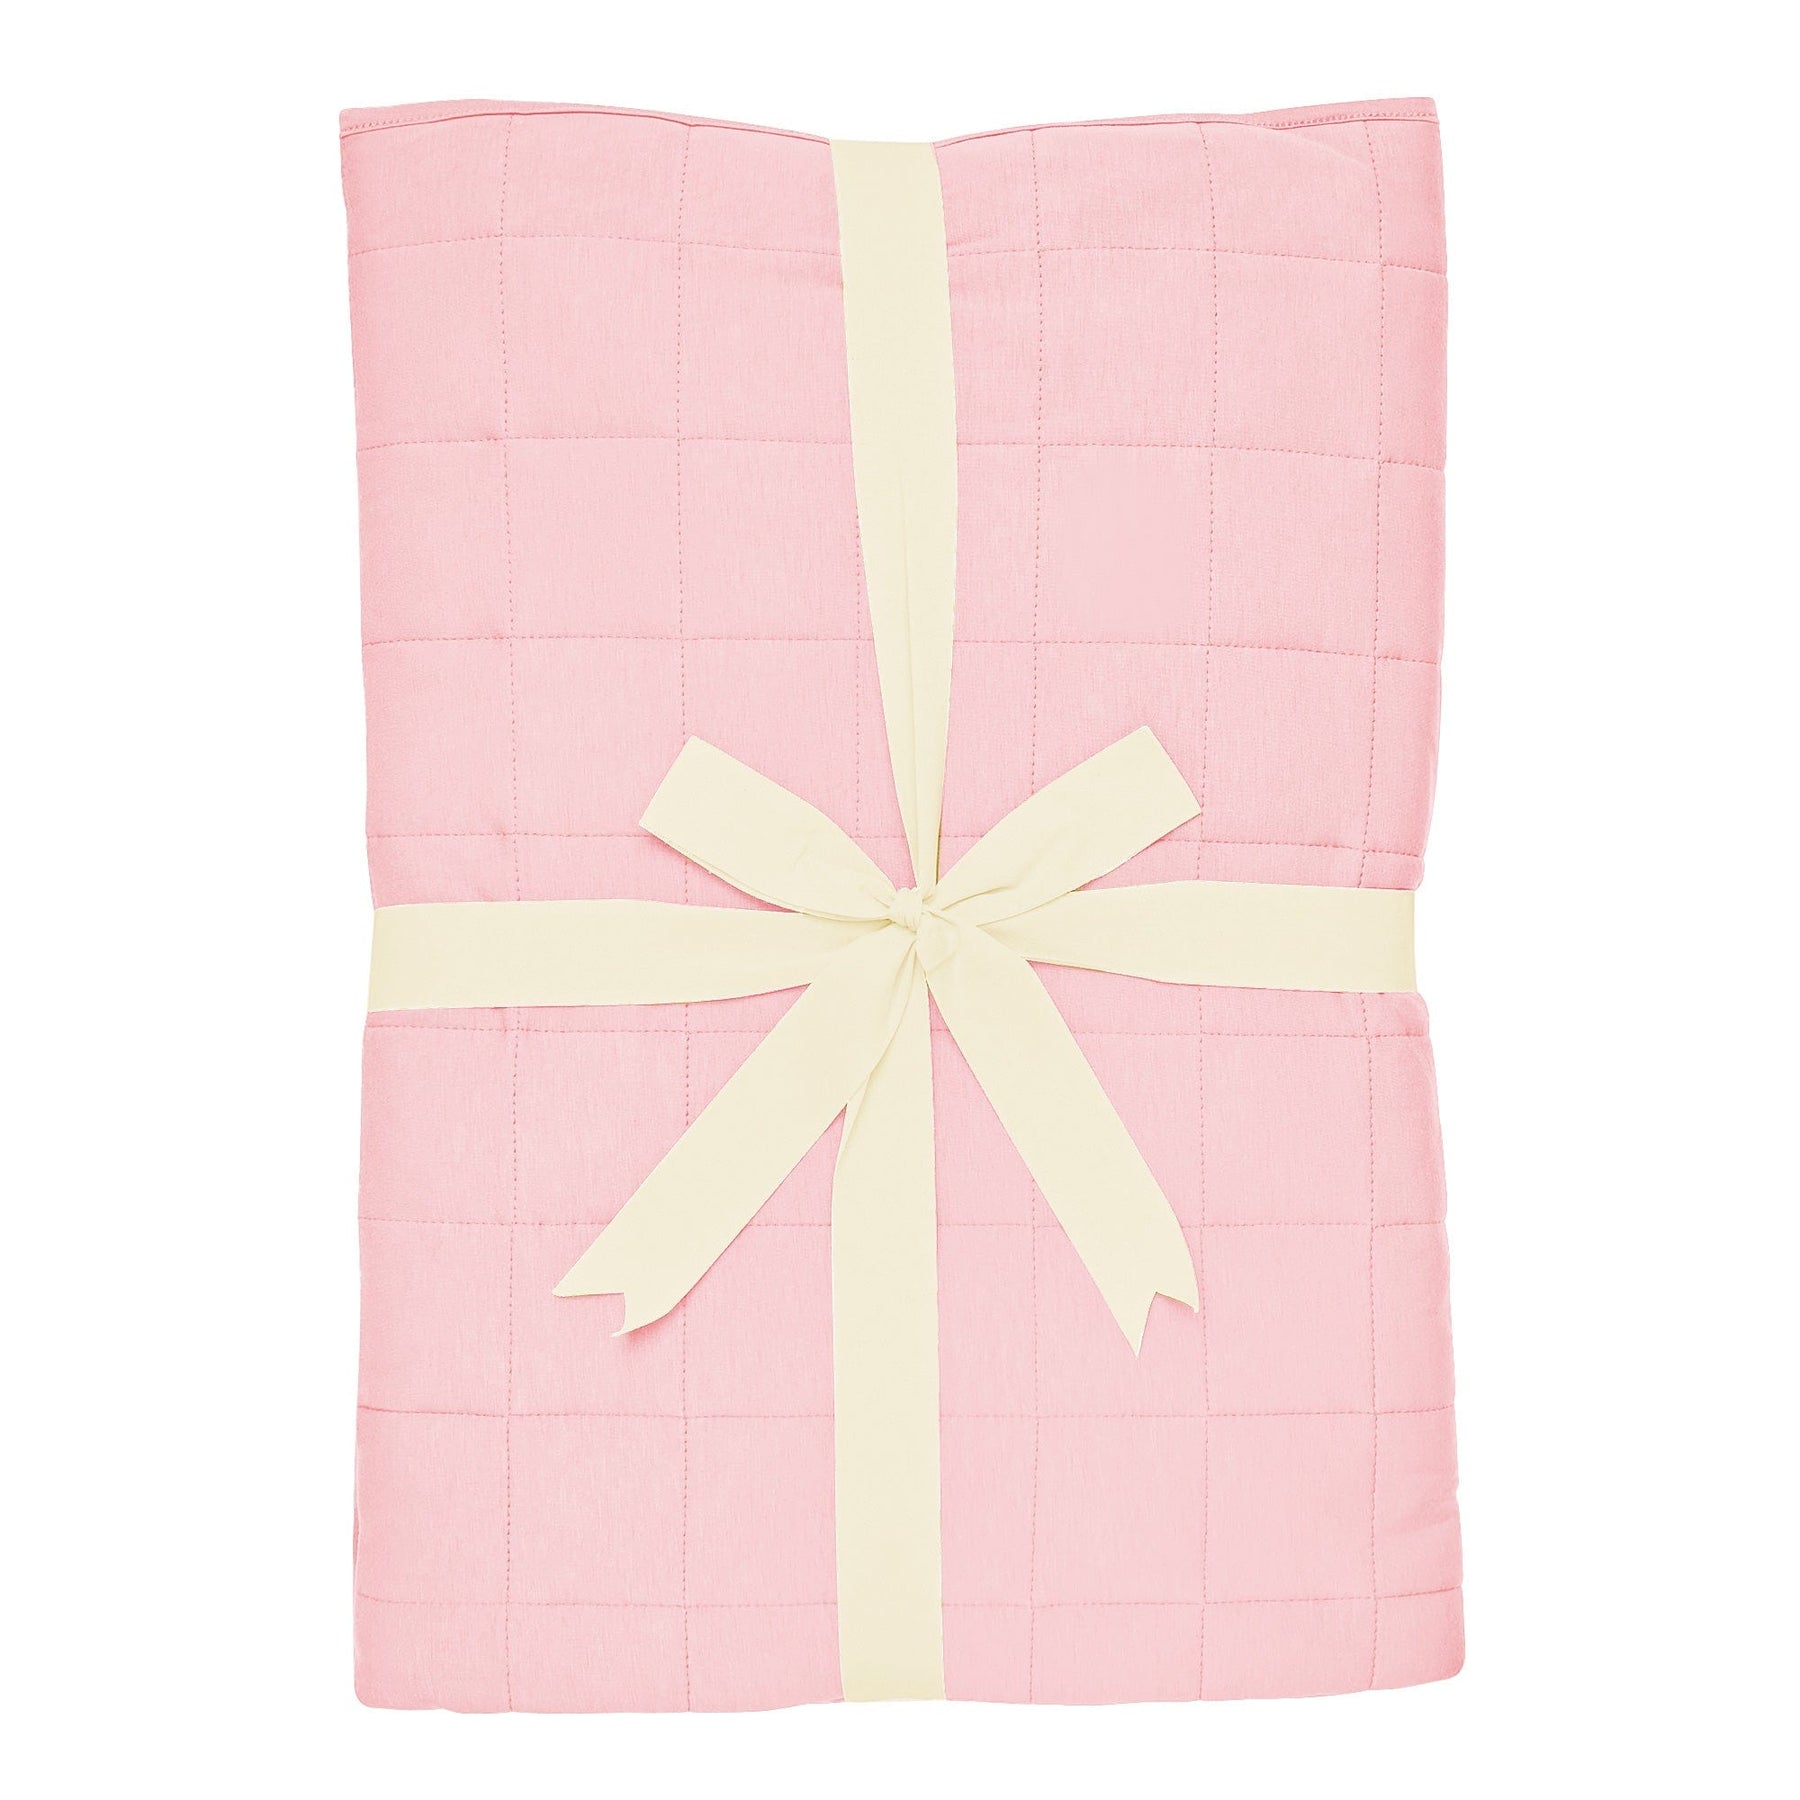 Kyte BABY Youth Blanket Crepe / Youth Youth Blanket in Crepe 1.0